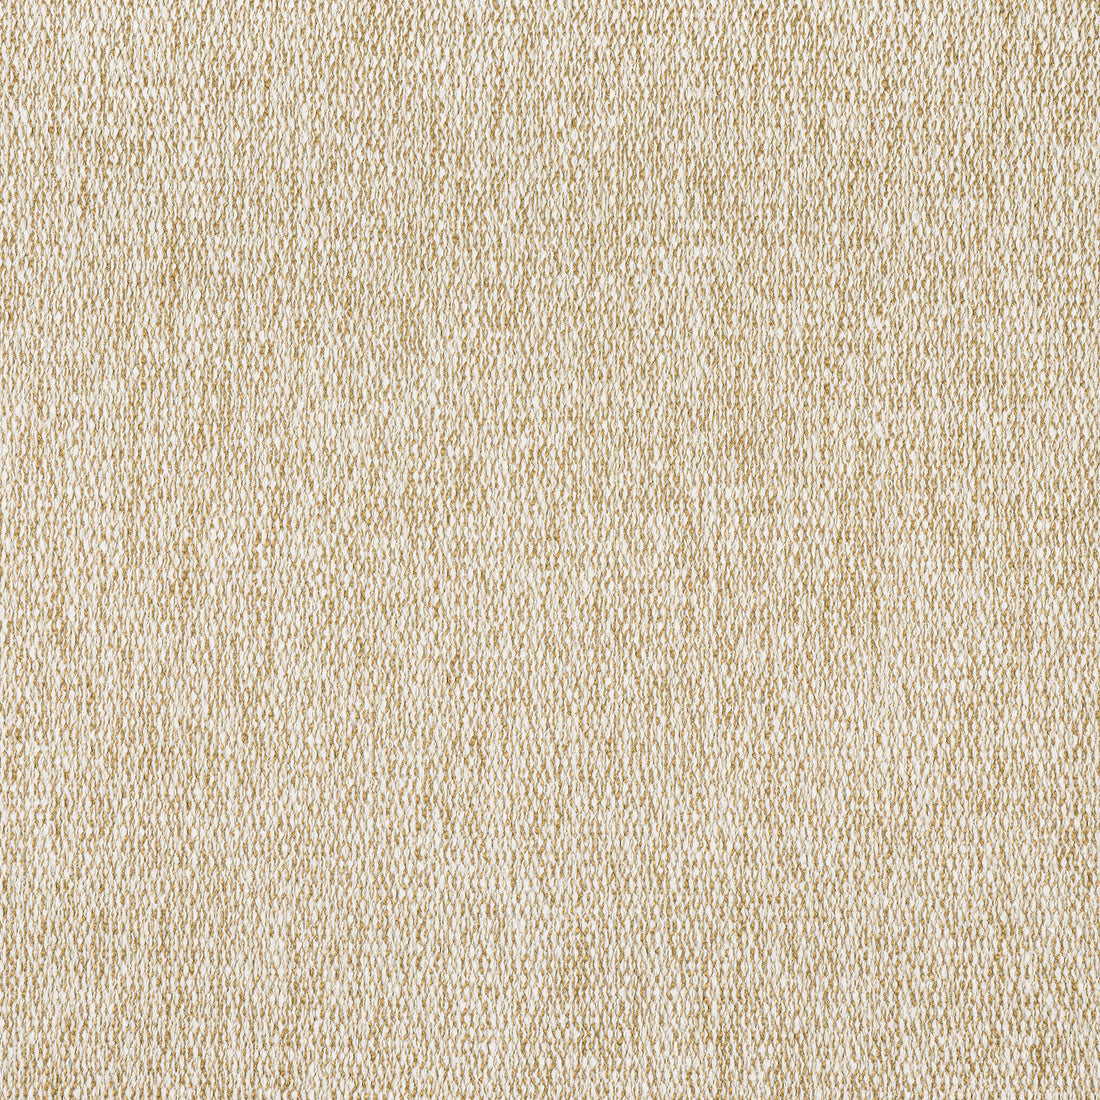 Arroyo fabric in caramel color - pattern number W8781 - by Thibaut in the Haven Textures collection